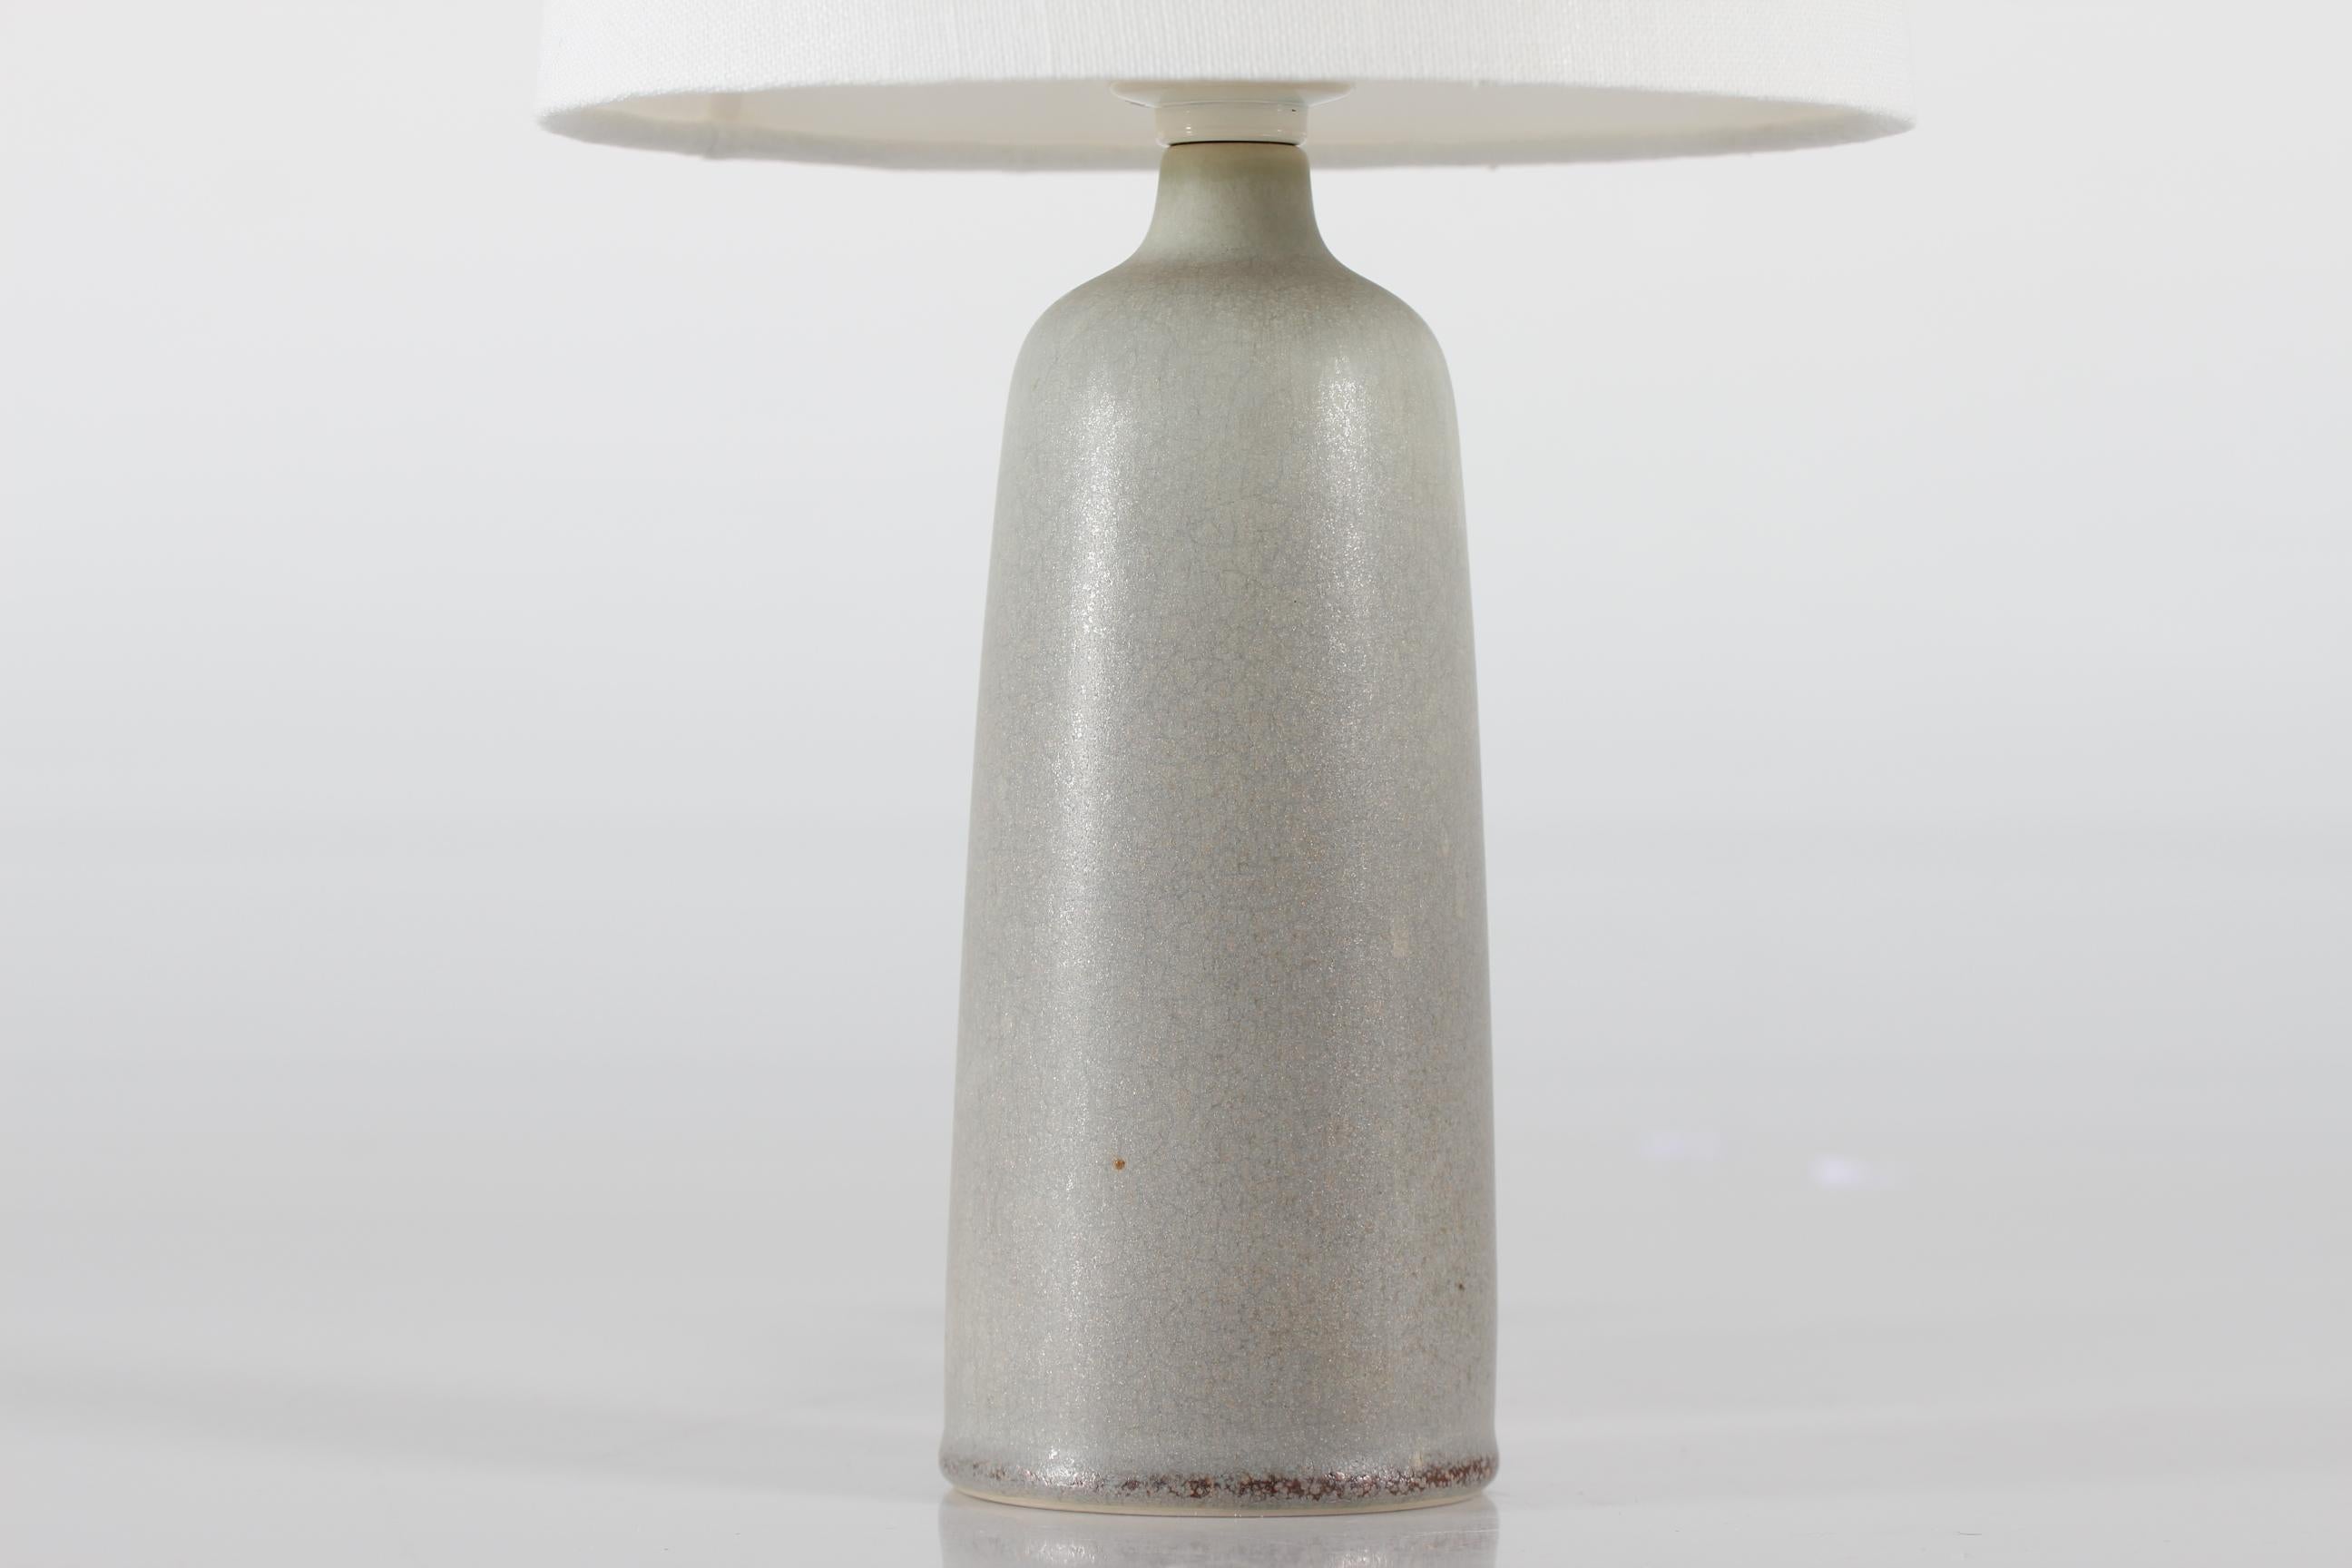 Small Palshus table- and bedside lamp with grey haresfur glaze designed by Per Linnemann-Schmidt. Made in in Denmark in the 1960s

Marked: Palshus + PLS for Per Linnemann-Schmidt + Denmark + DL16

Included is a new lampshade designed and made in